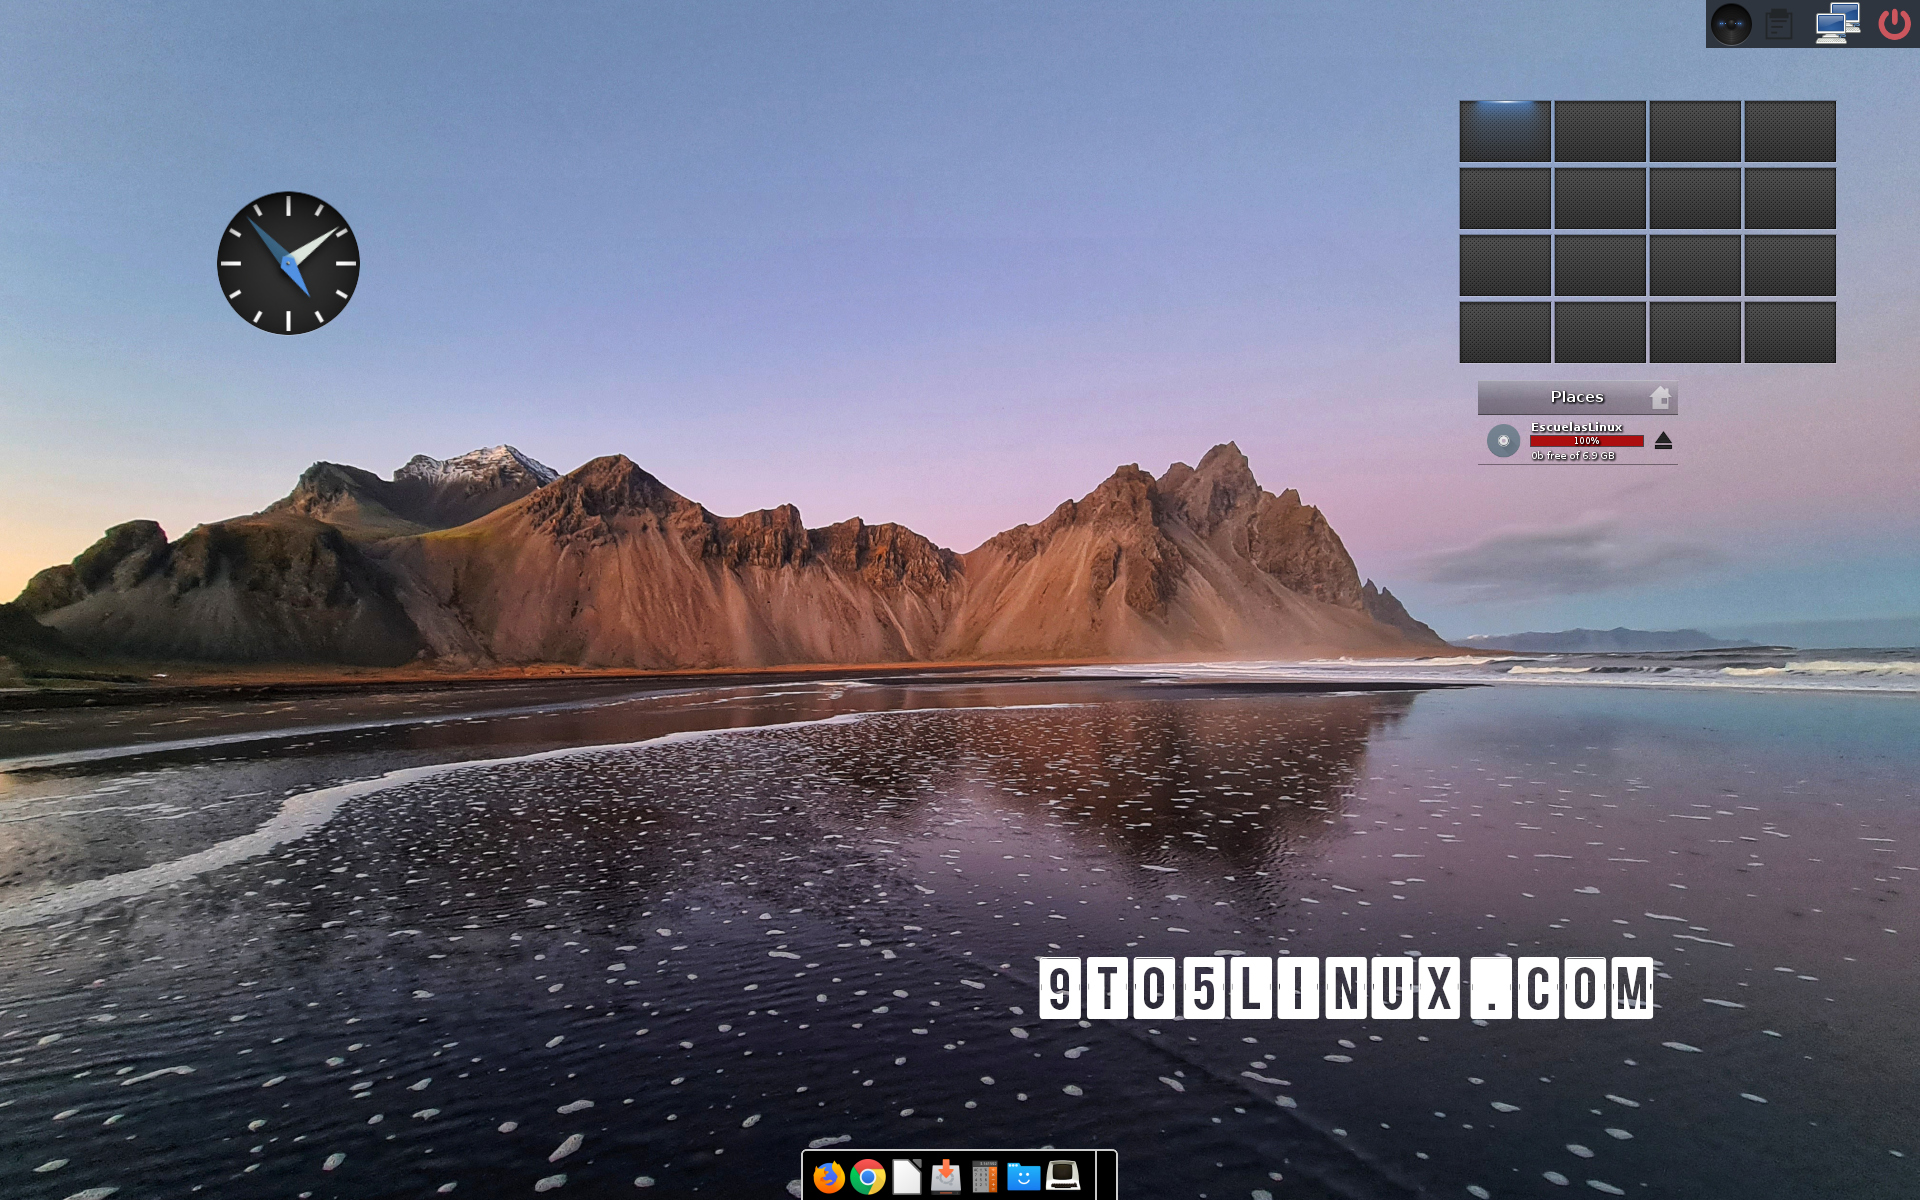 Educational Distro Escuelas Linux 7.1 Comes with Linux Kernel 5.11, Updated Apps